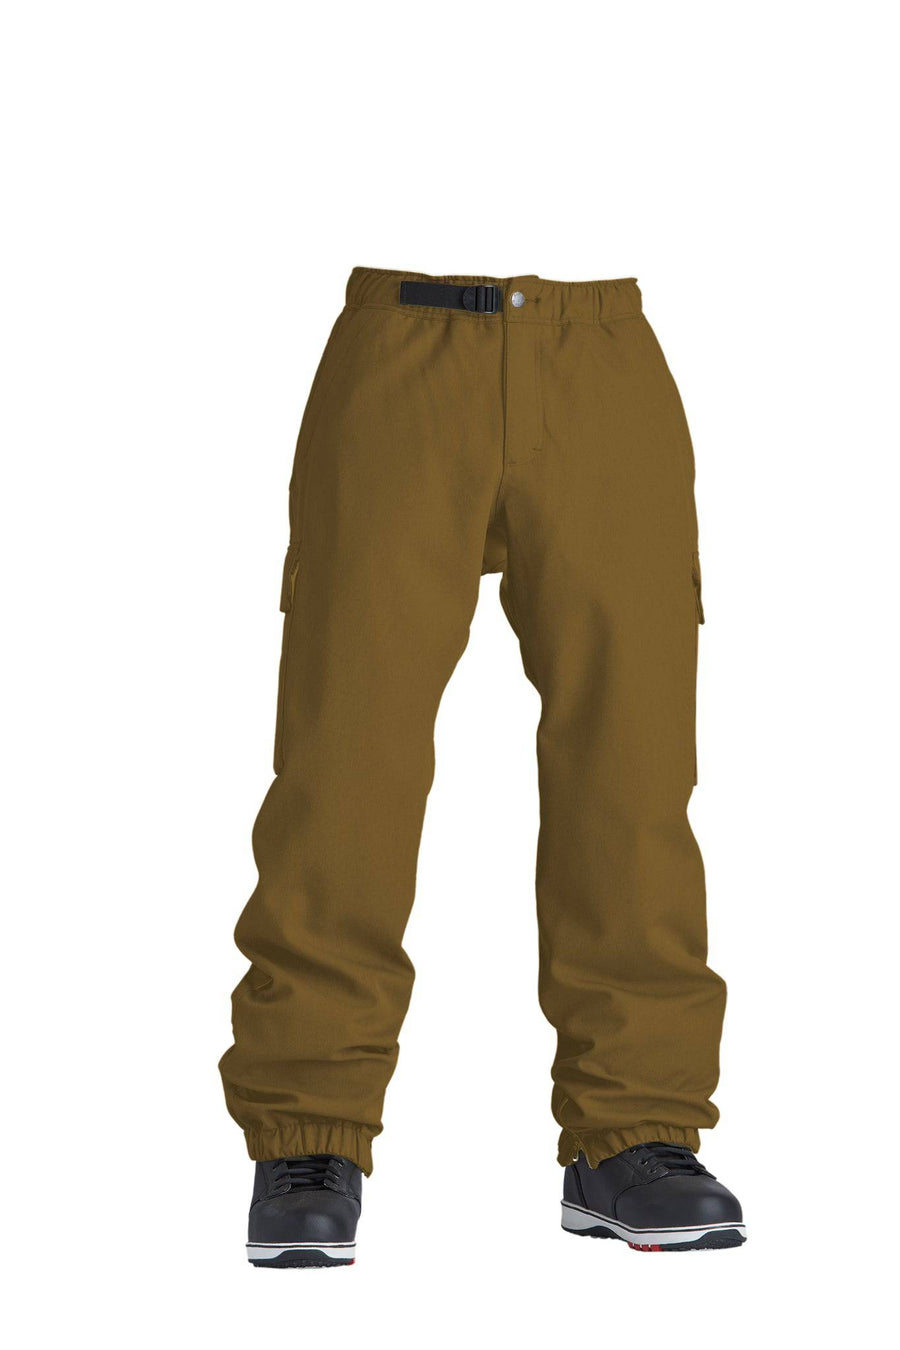 Airblaster Freedom Boss Pant in Grizzly 2023